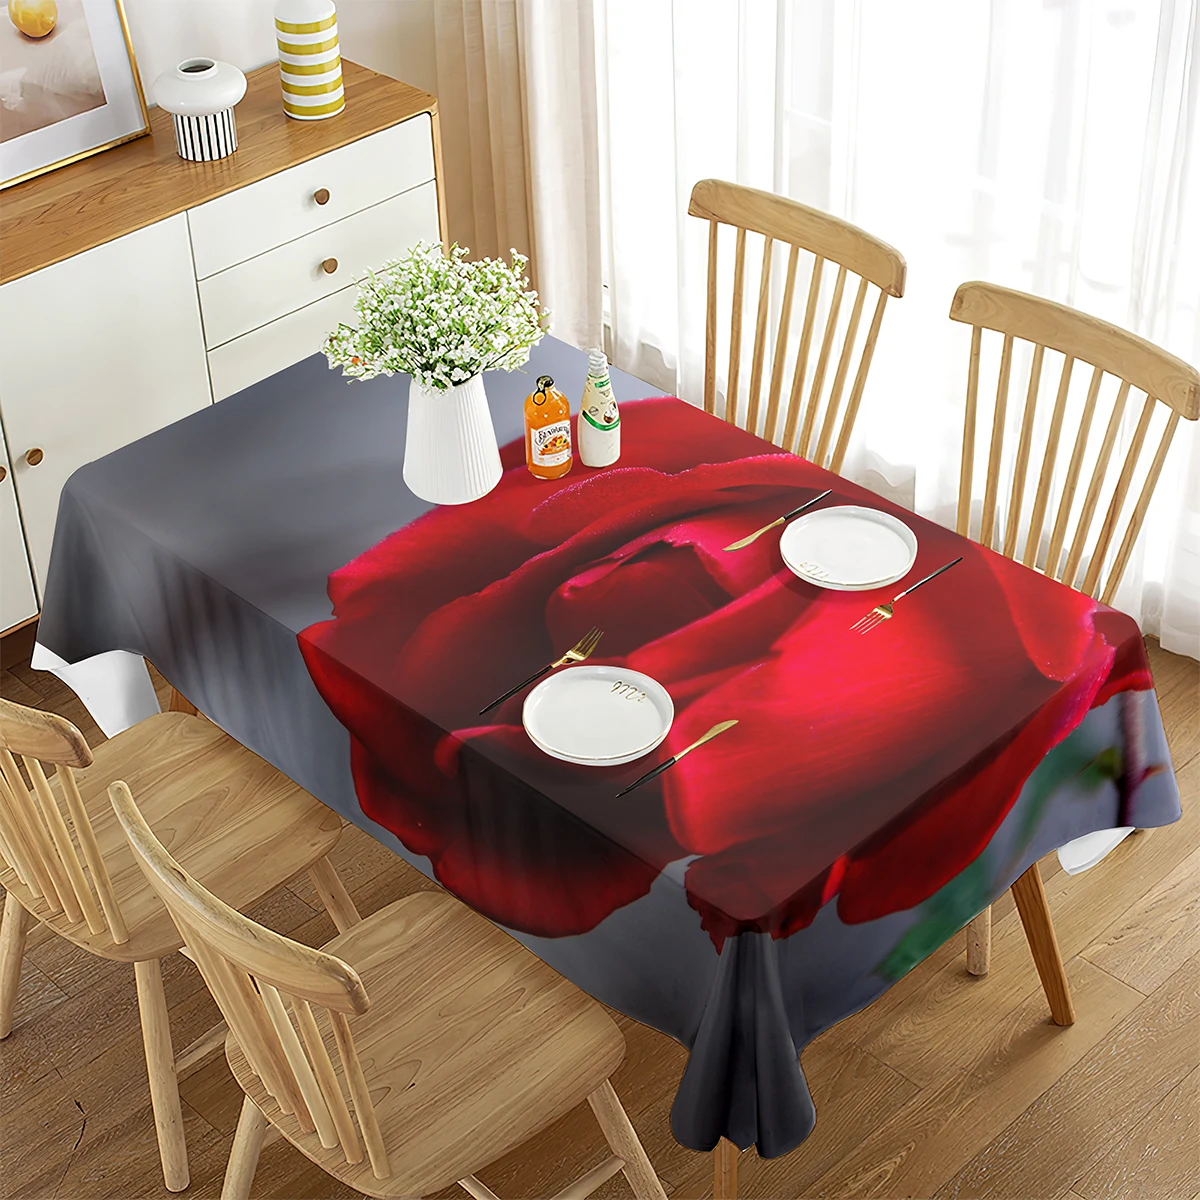 

Roses Rectangular Tablecloth Roses Simple Romantic Style Valentine's Day for Dining Room Wedding Banquet Party Living Room Decor